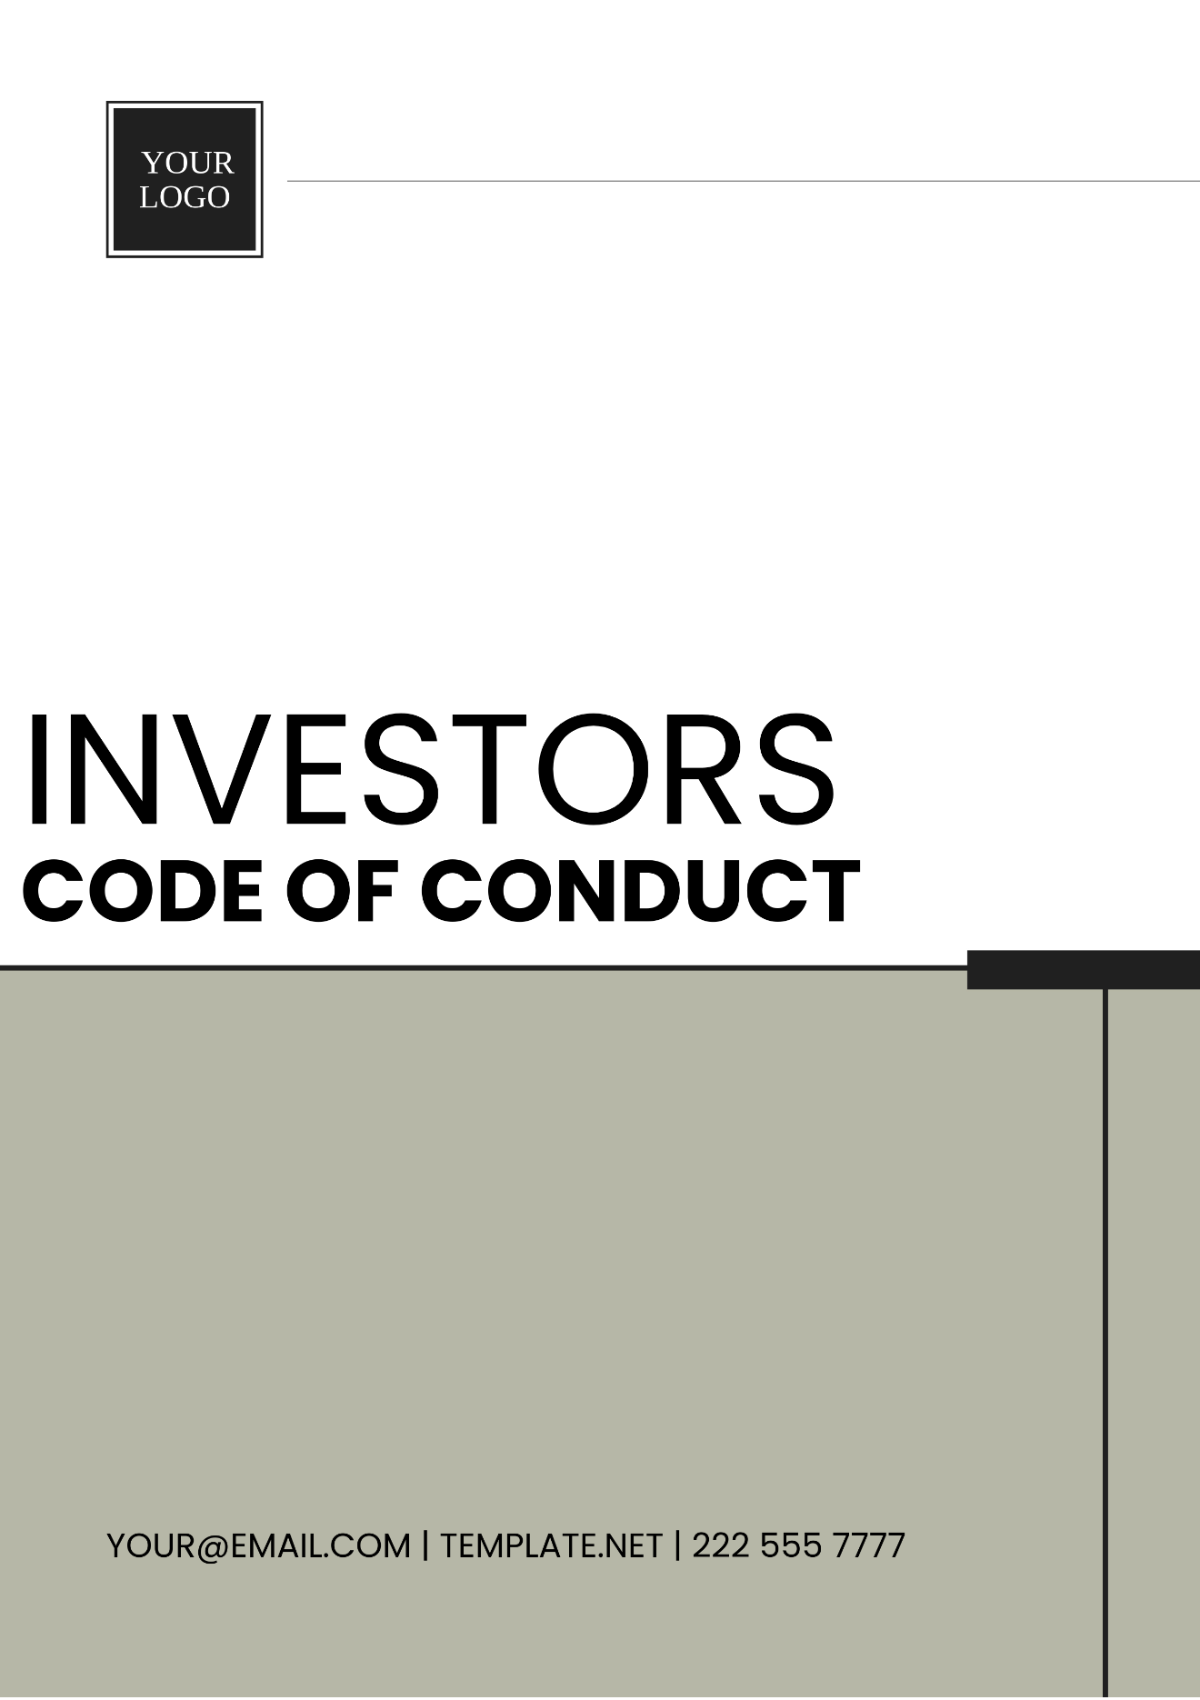 Investors Code of Conduct Template